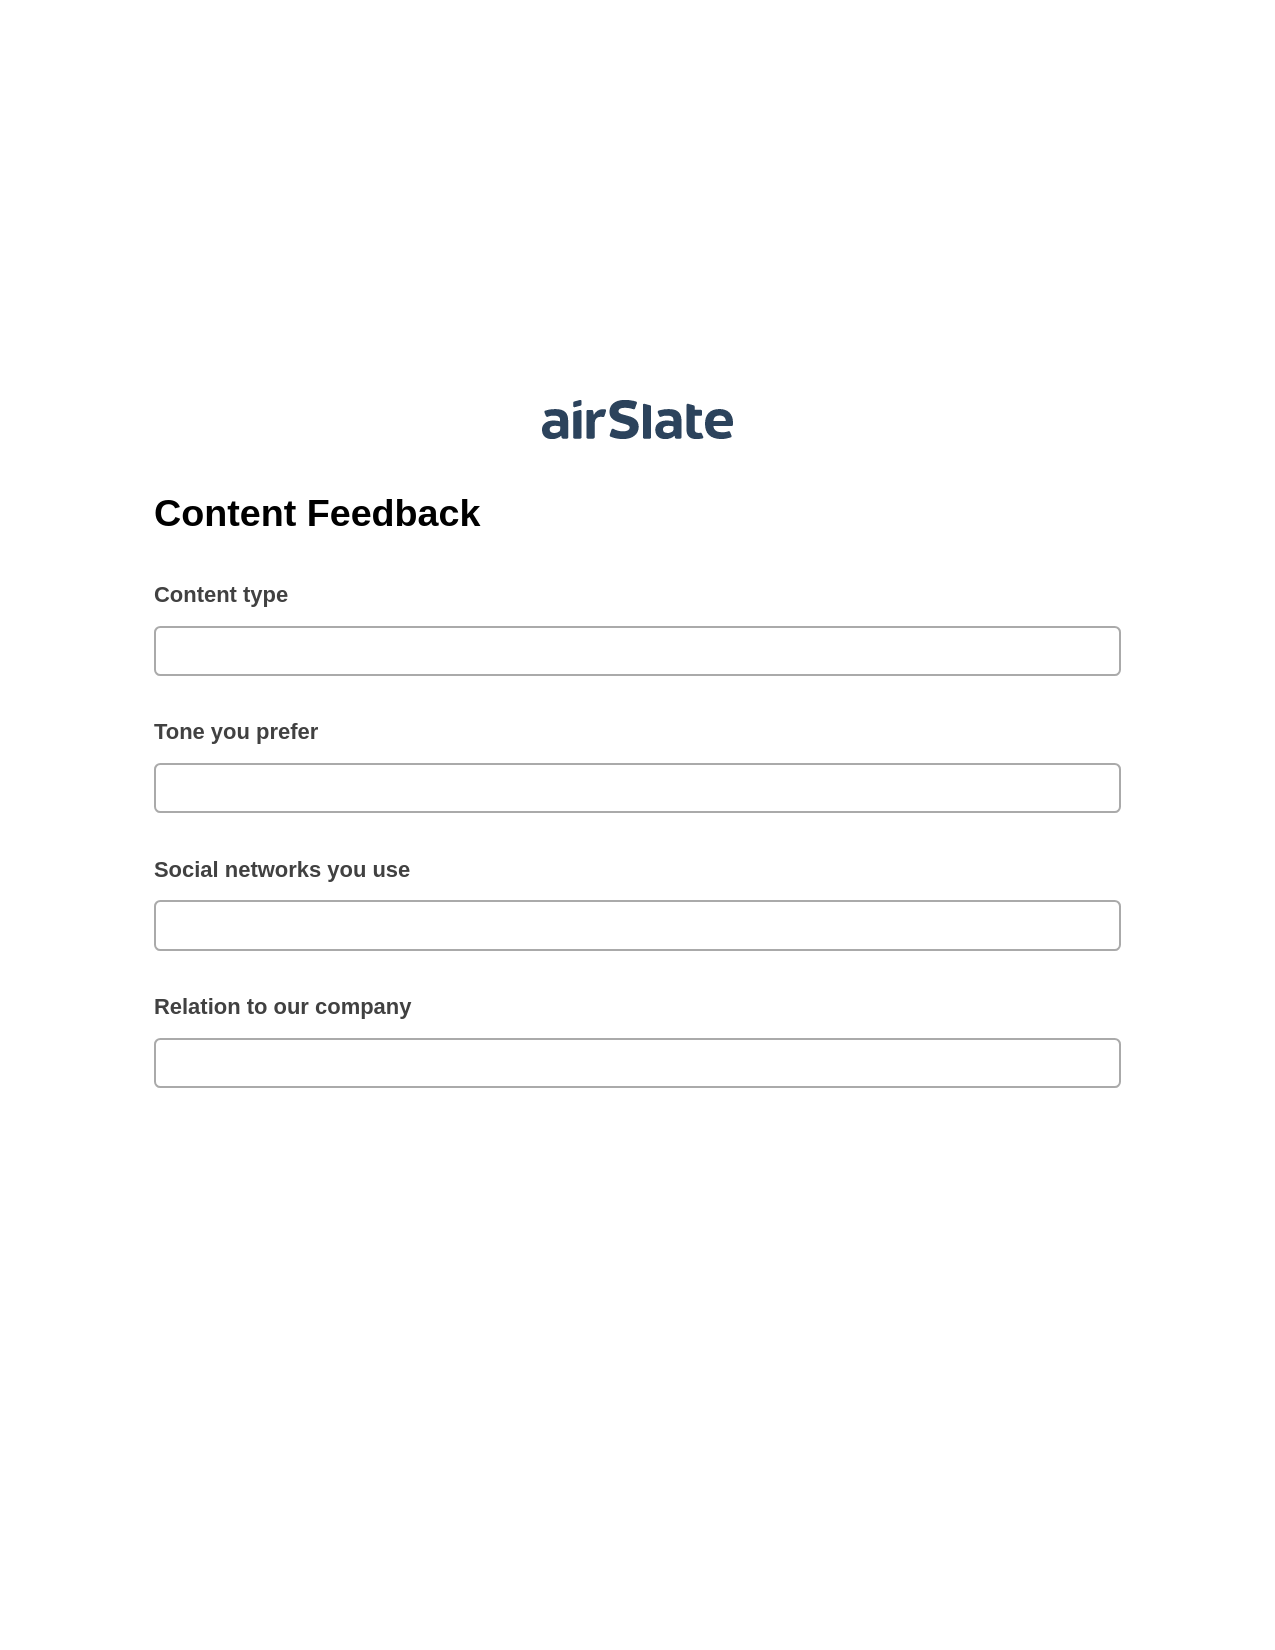 Content Feedback Pre-fill Slate from MS Dynamics 365 Records Bot, SendGrid send Campaign bot, Export to Google Sheet Bot